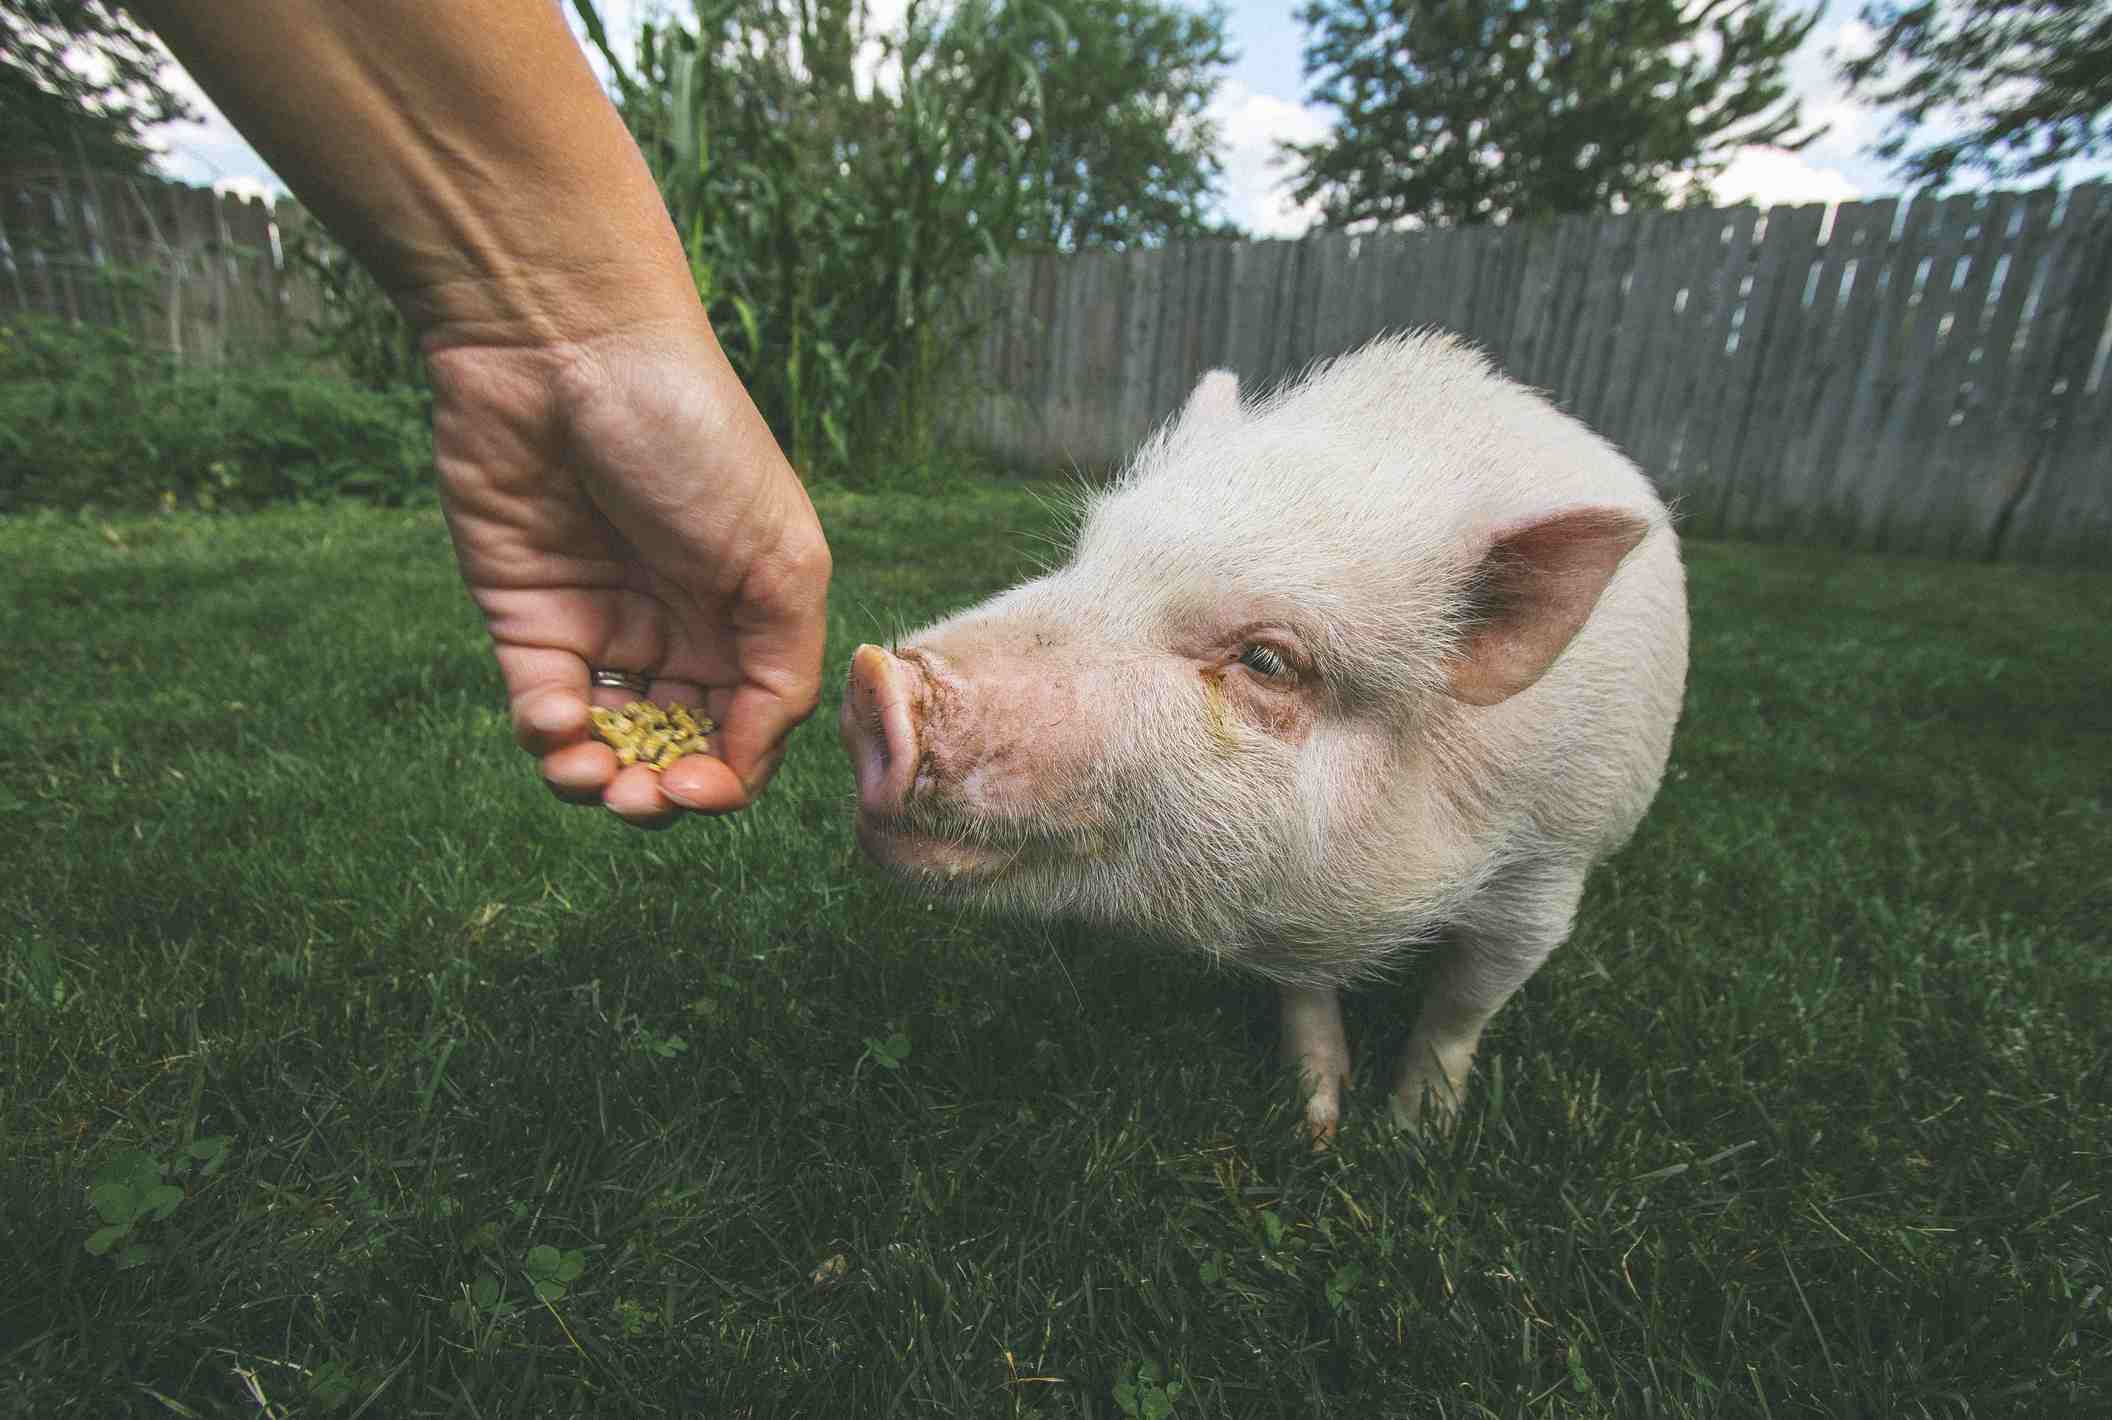 Pig taking food from a hand outside in grass.